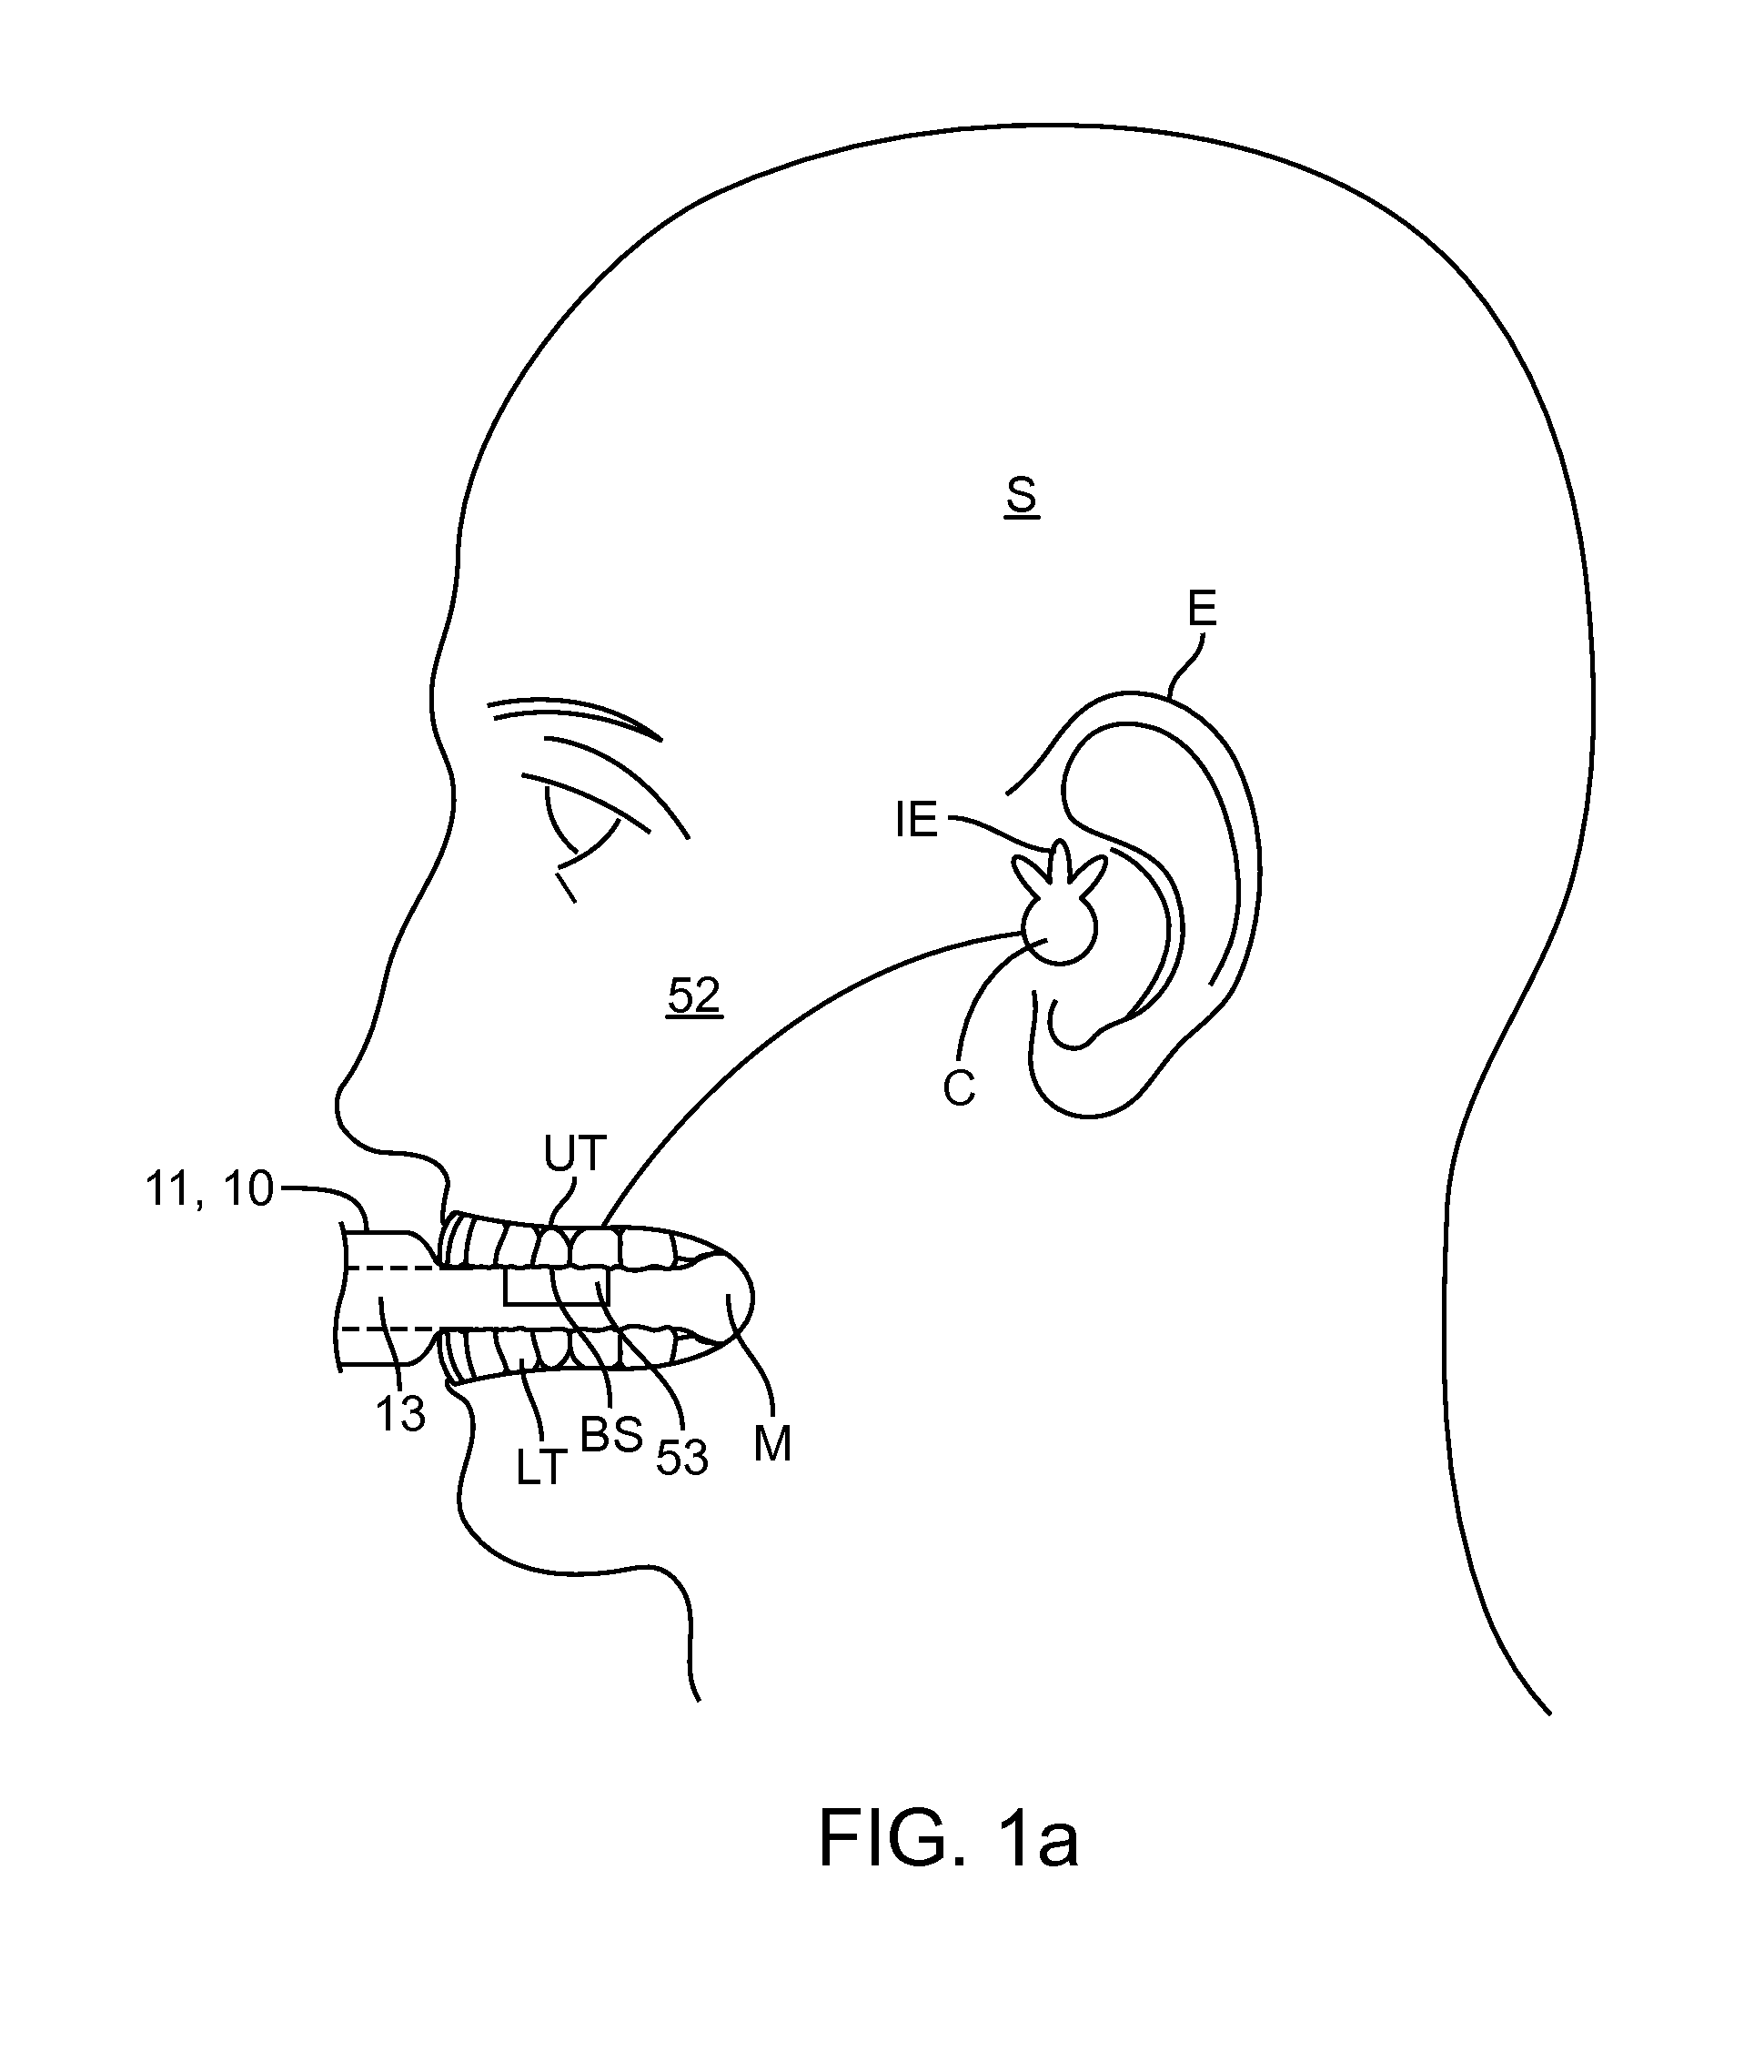 Apparatus, system and method for underwater signaling of audio messages to a diver